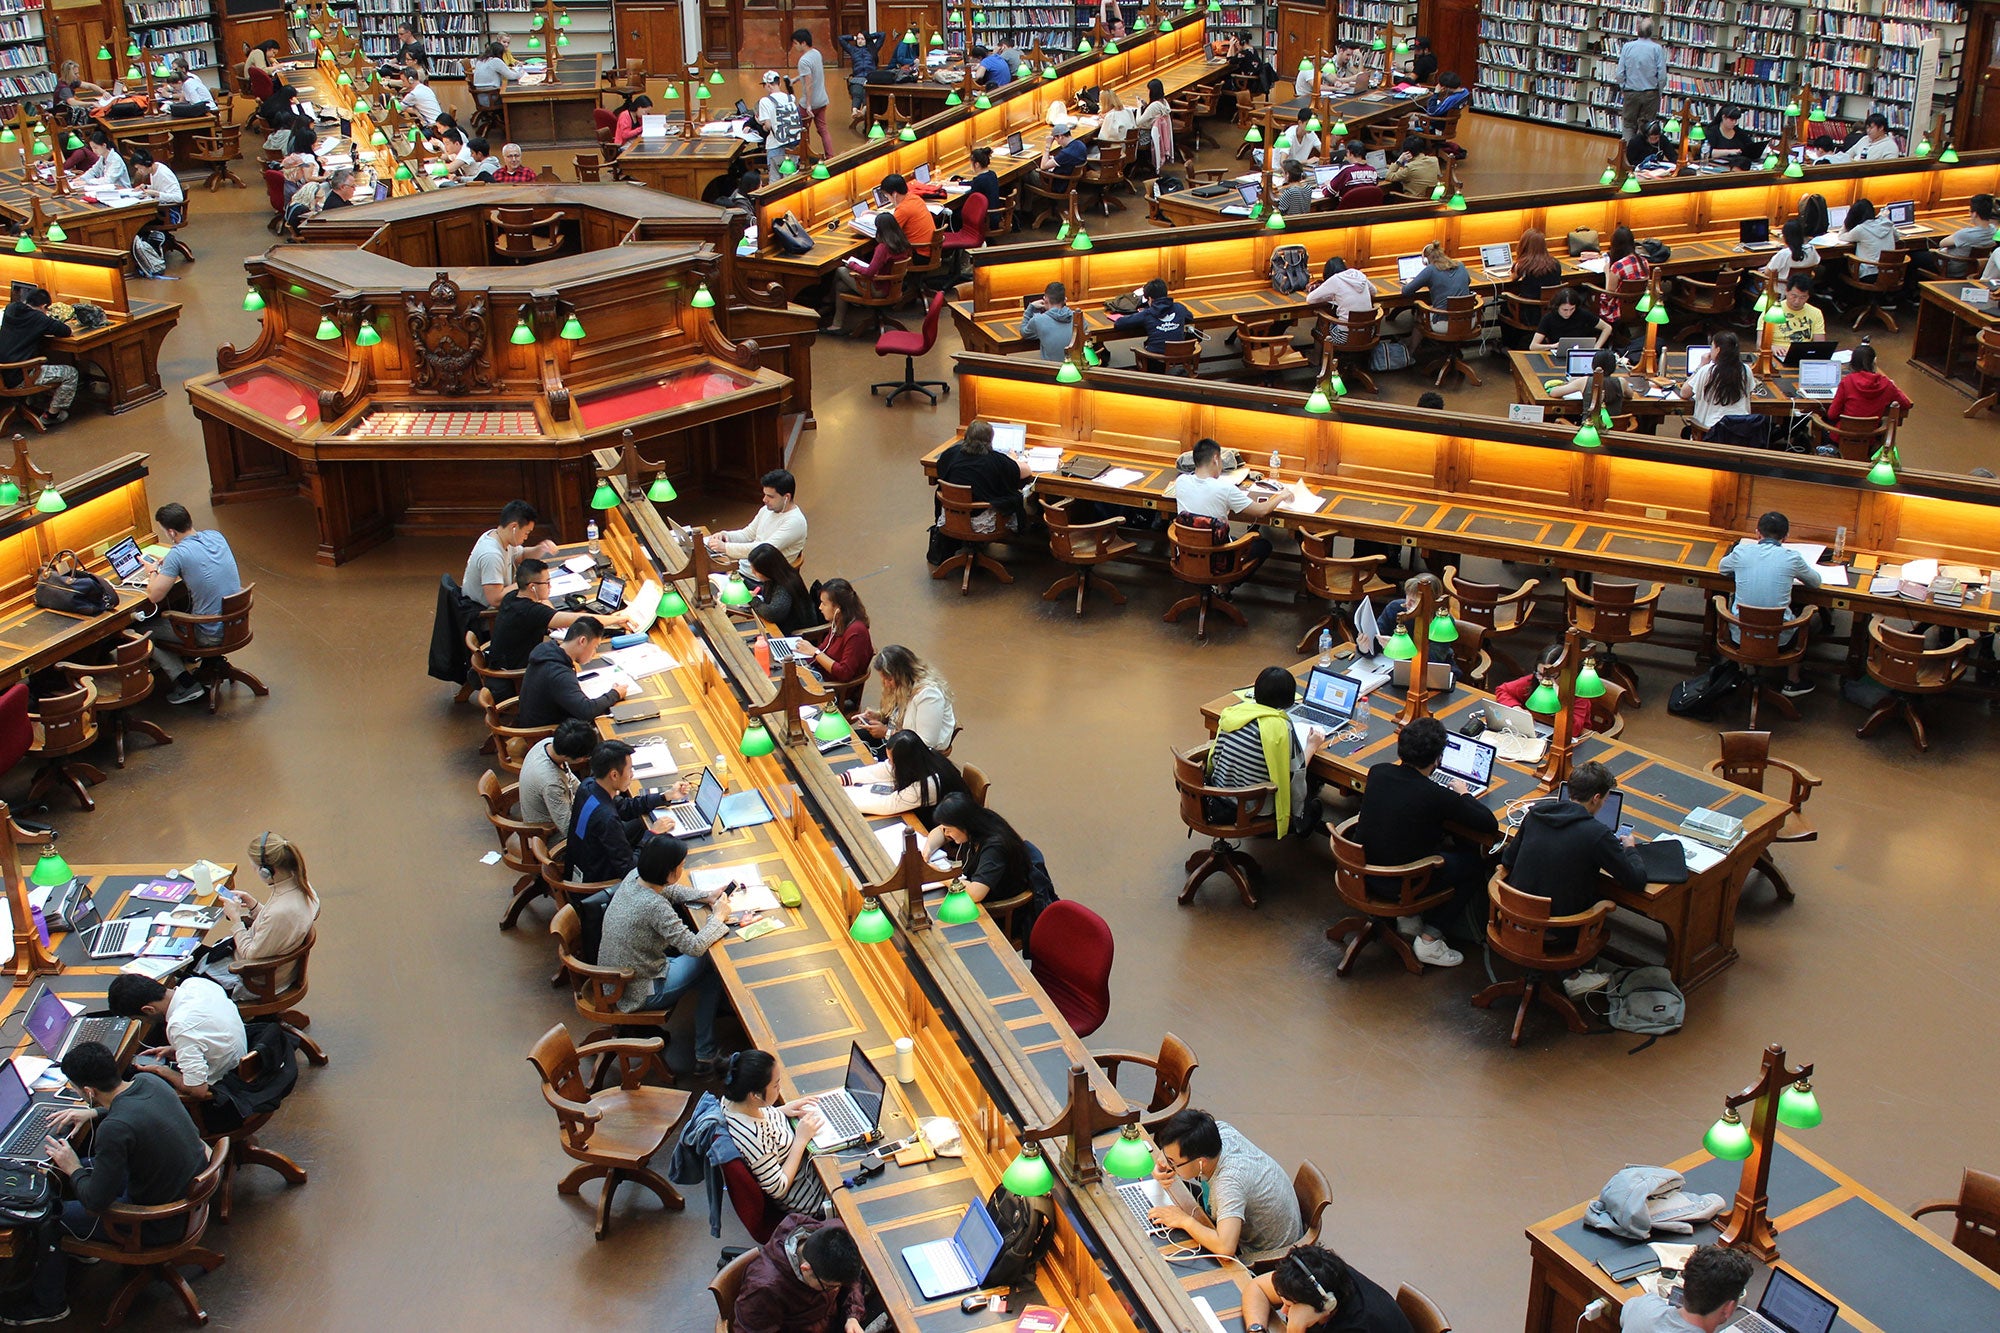 Wide angle view of a library filled with students all studying at their own desks